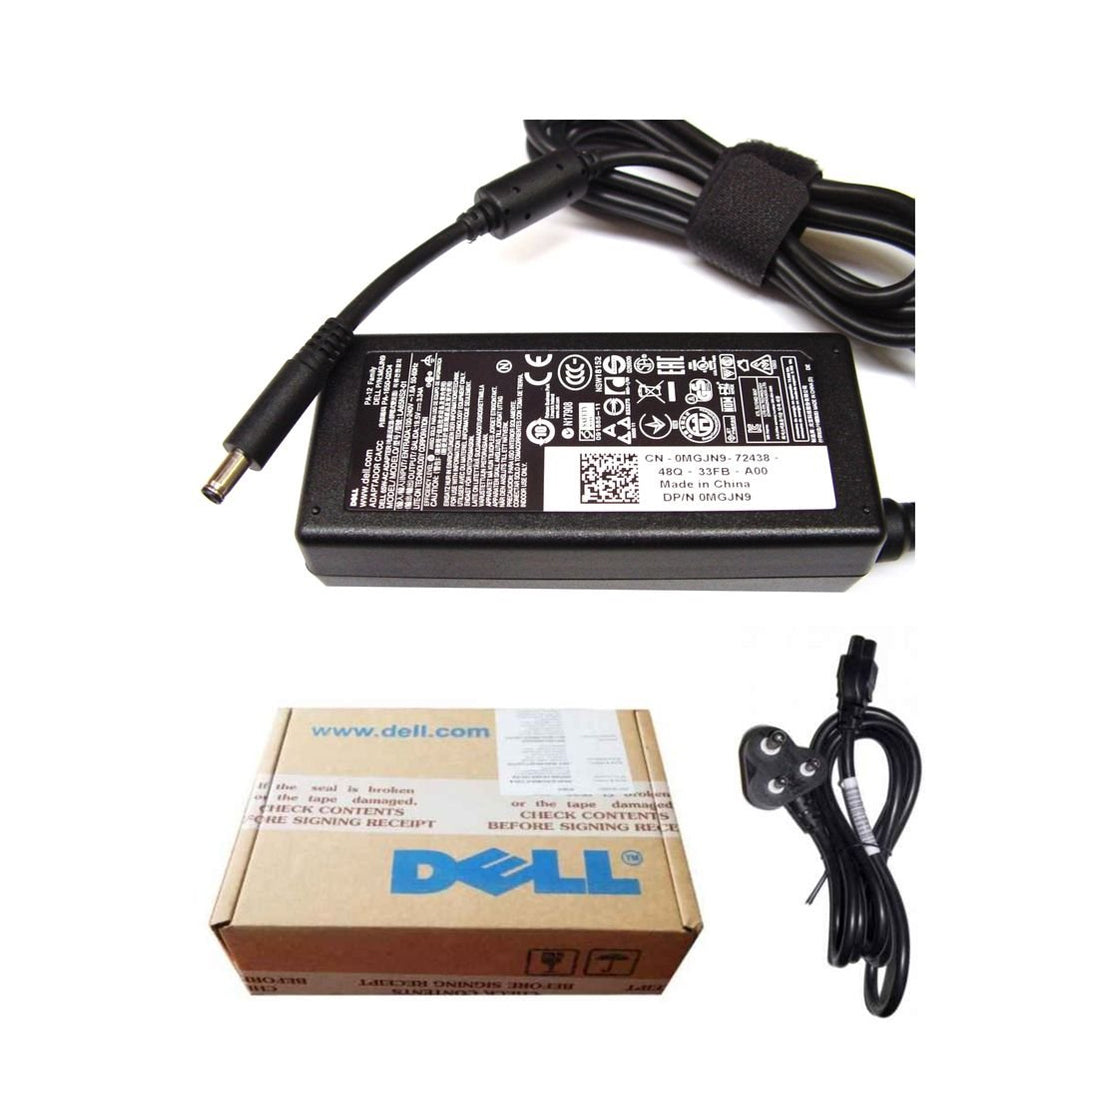 Dell Original 65W 19.5V 4.5mm Pin Laptop Charger Adapter for Latitude 3490 With Power Cord